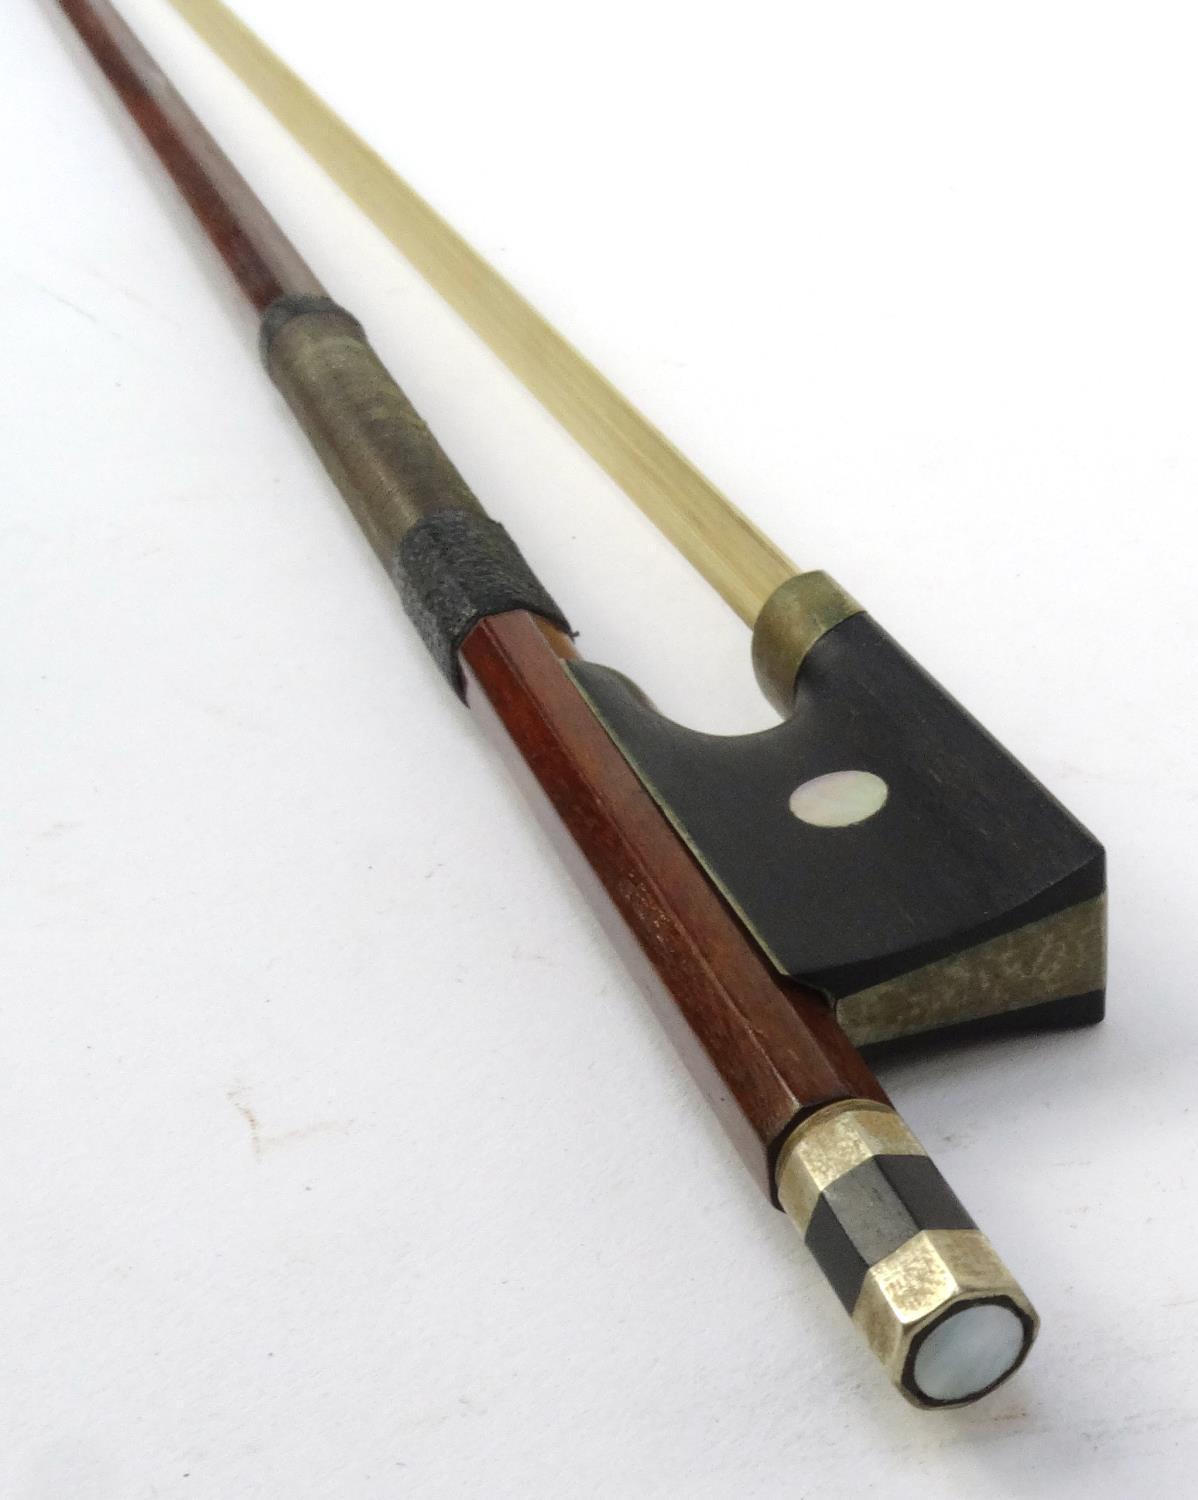 Wooden violin bow, stamped 'Bausch', 74cm long - Image 9 of 9